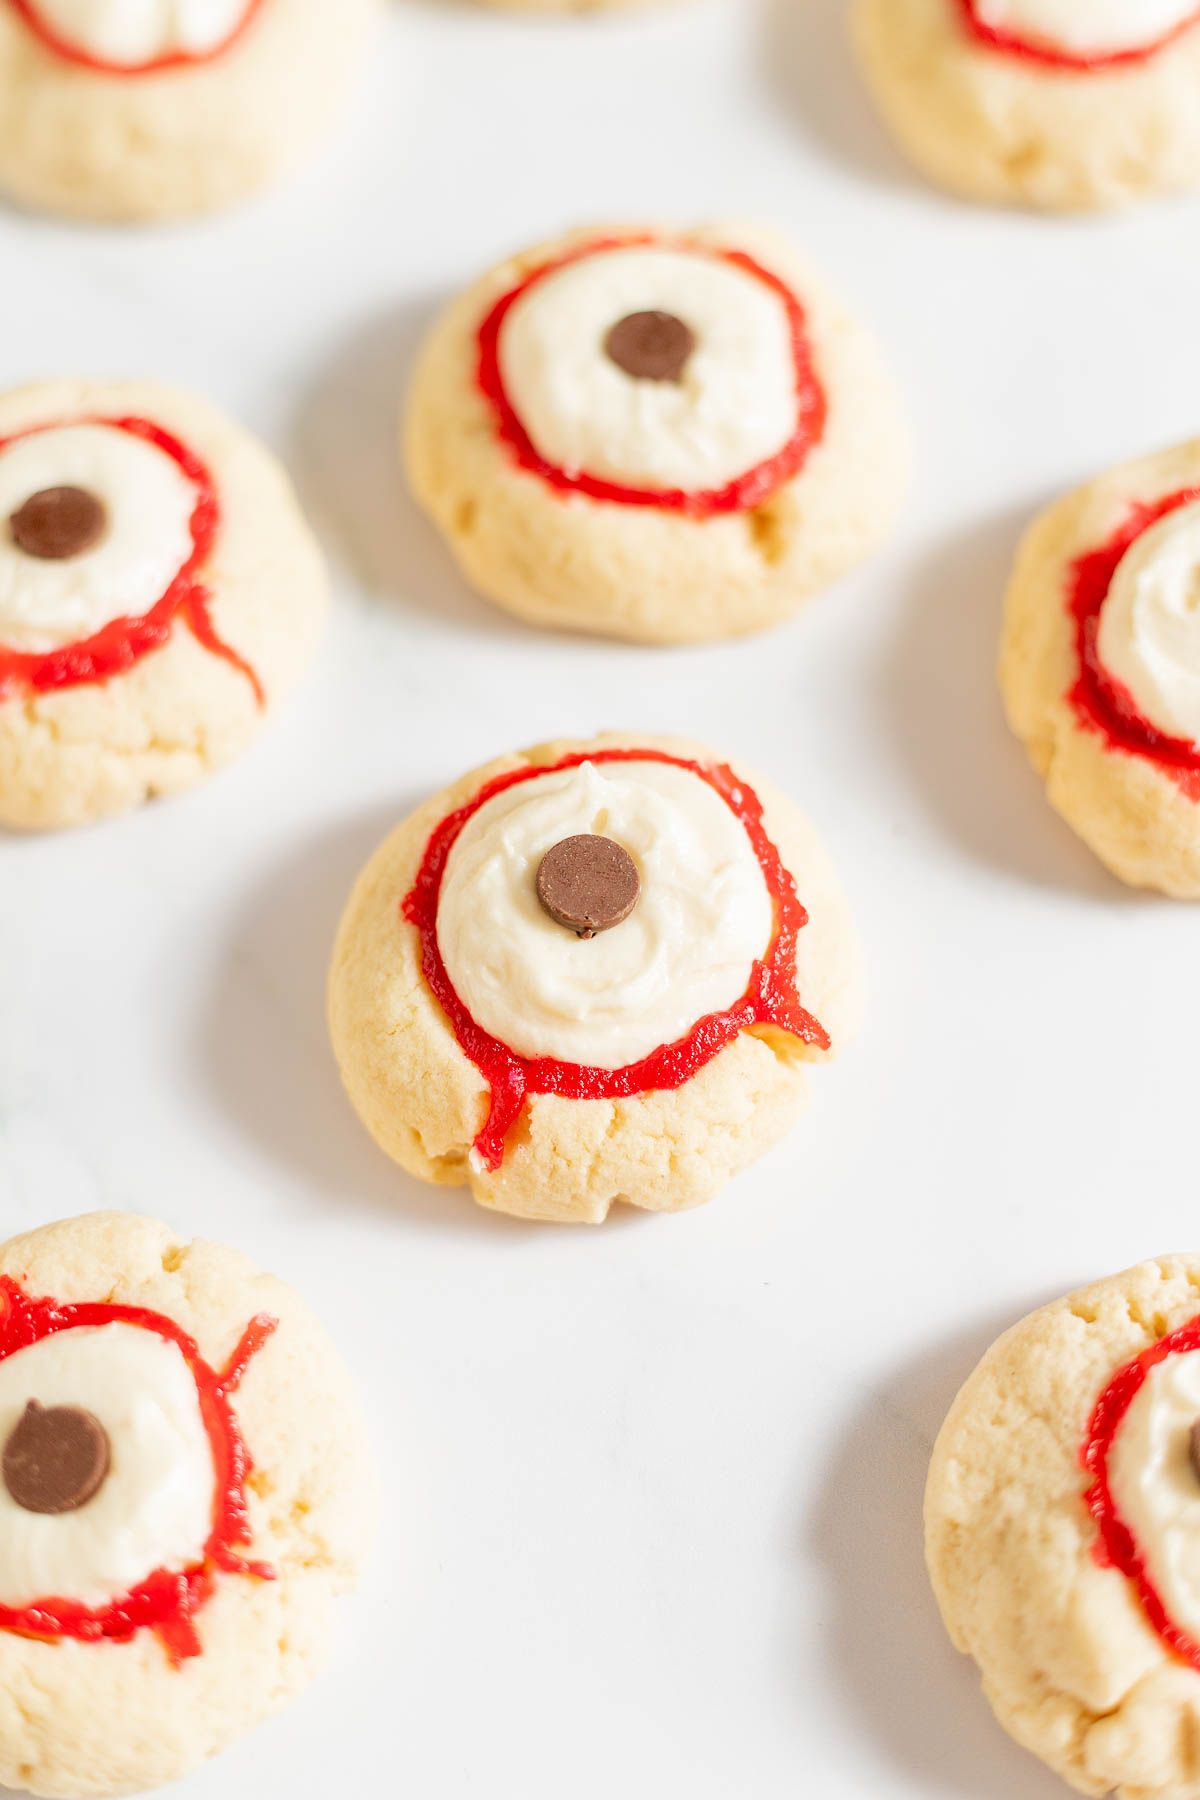 Eyeball cookies with red and white frosting, on a white surface